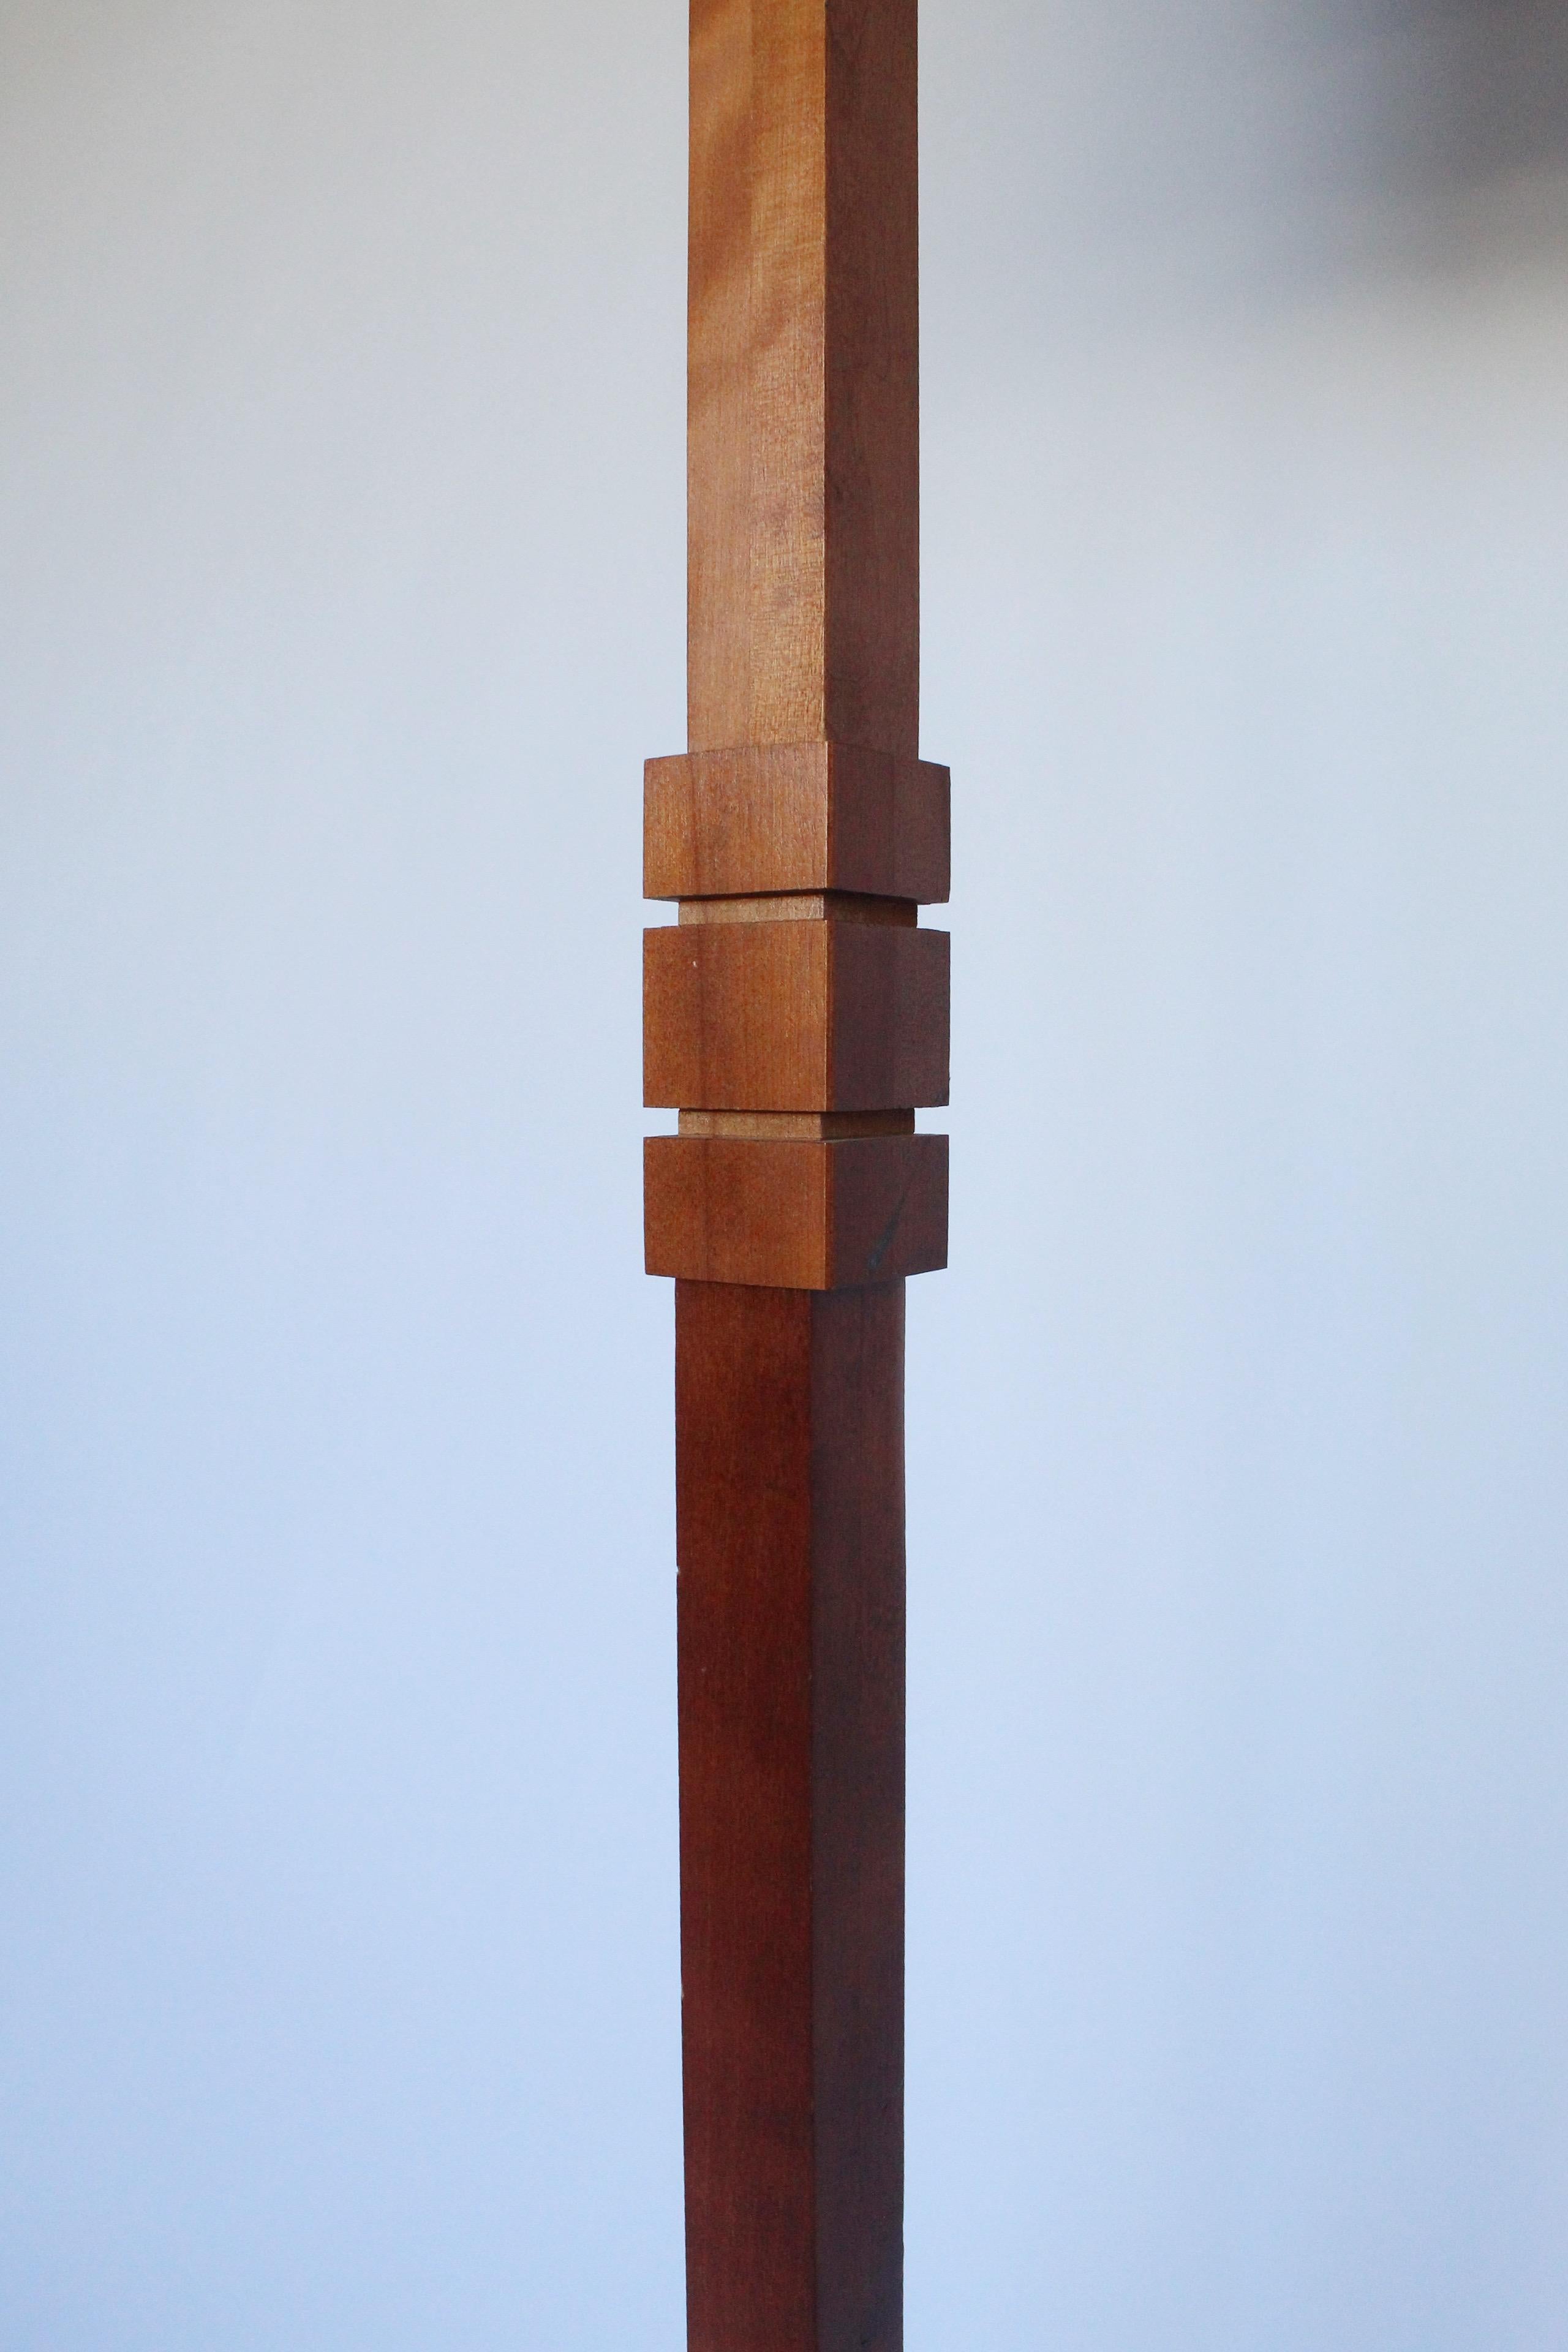 Hand-Crafted Arts & Crafts Floor Lamp in the Style of Frank Lloyd Wright